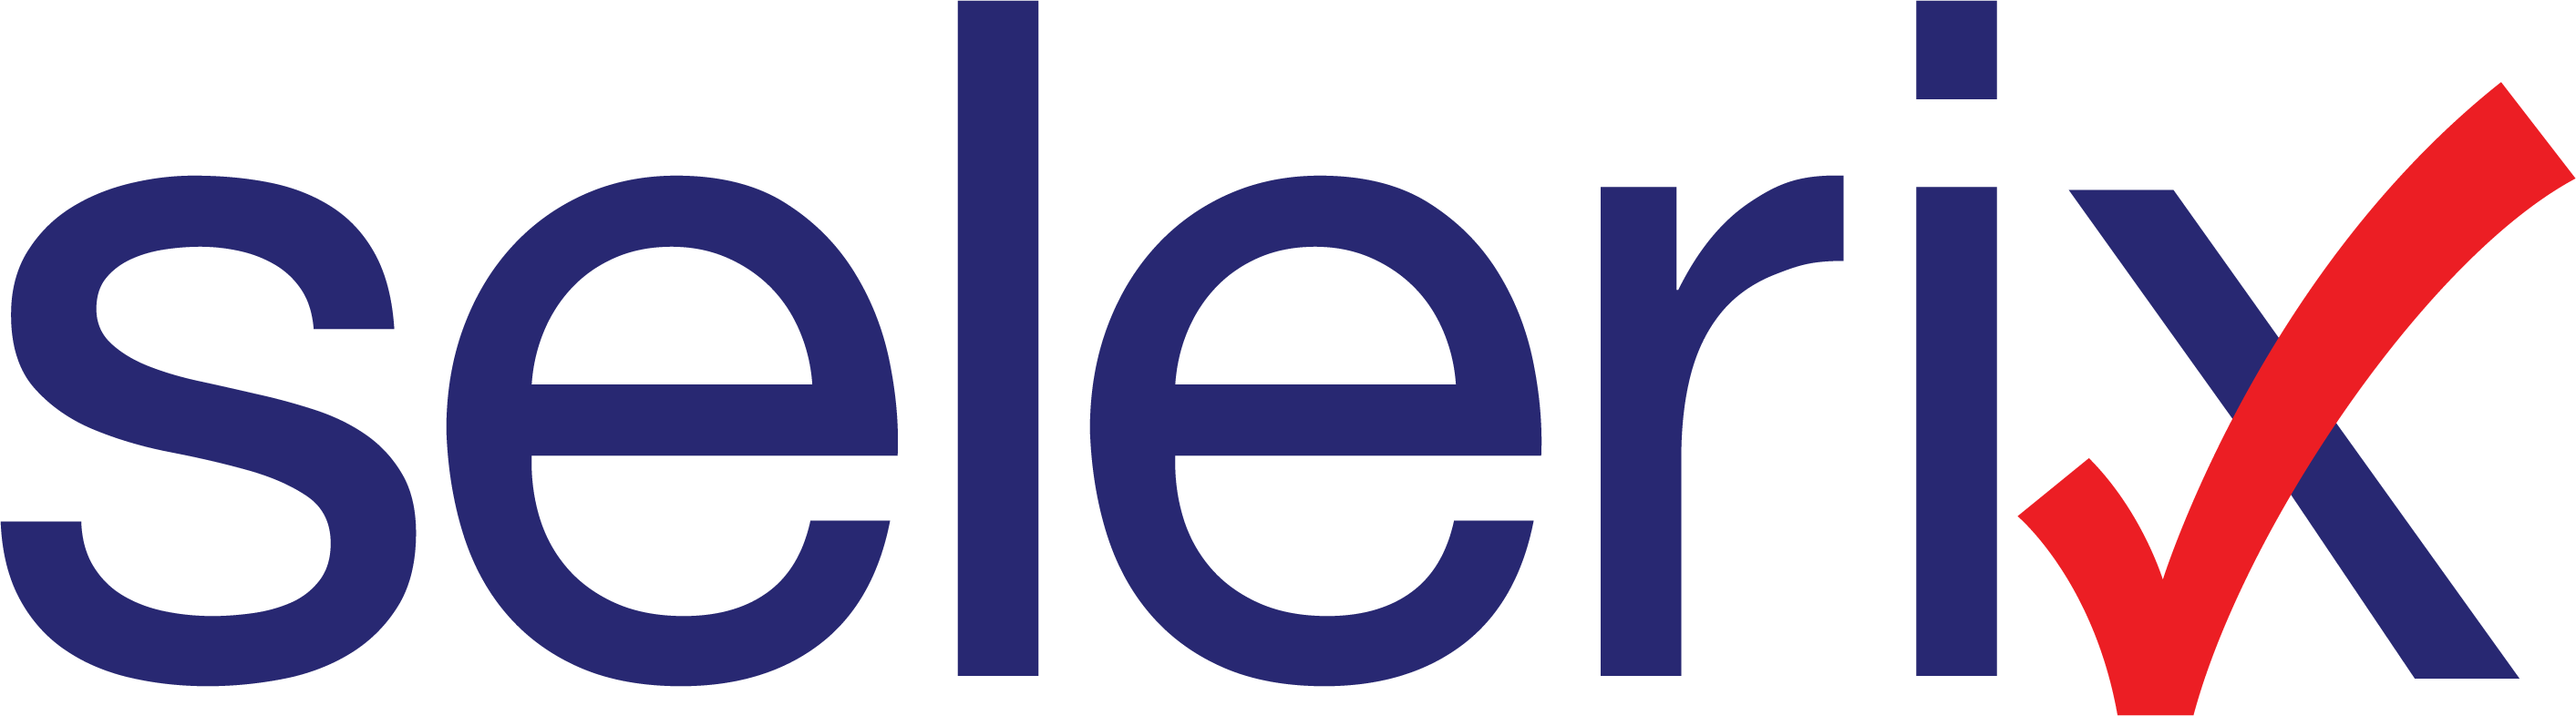 Selerix Systems